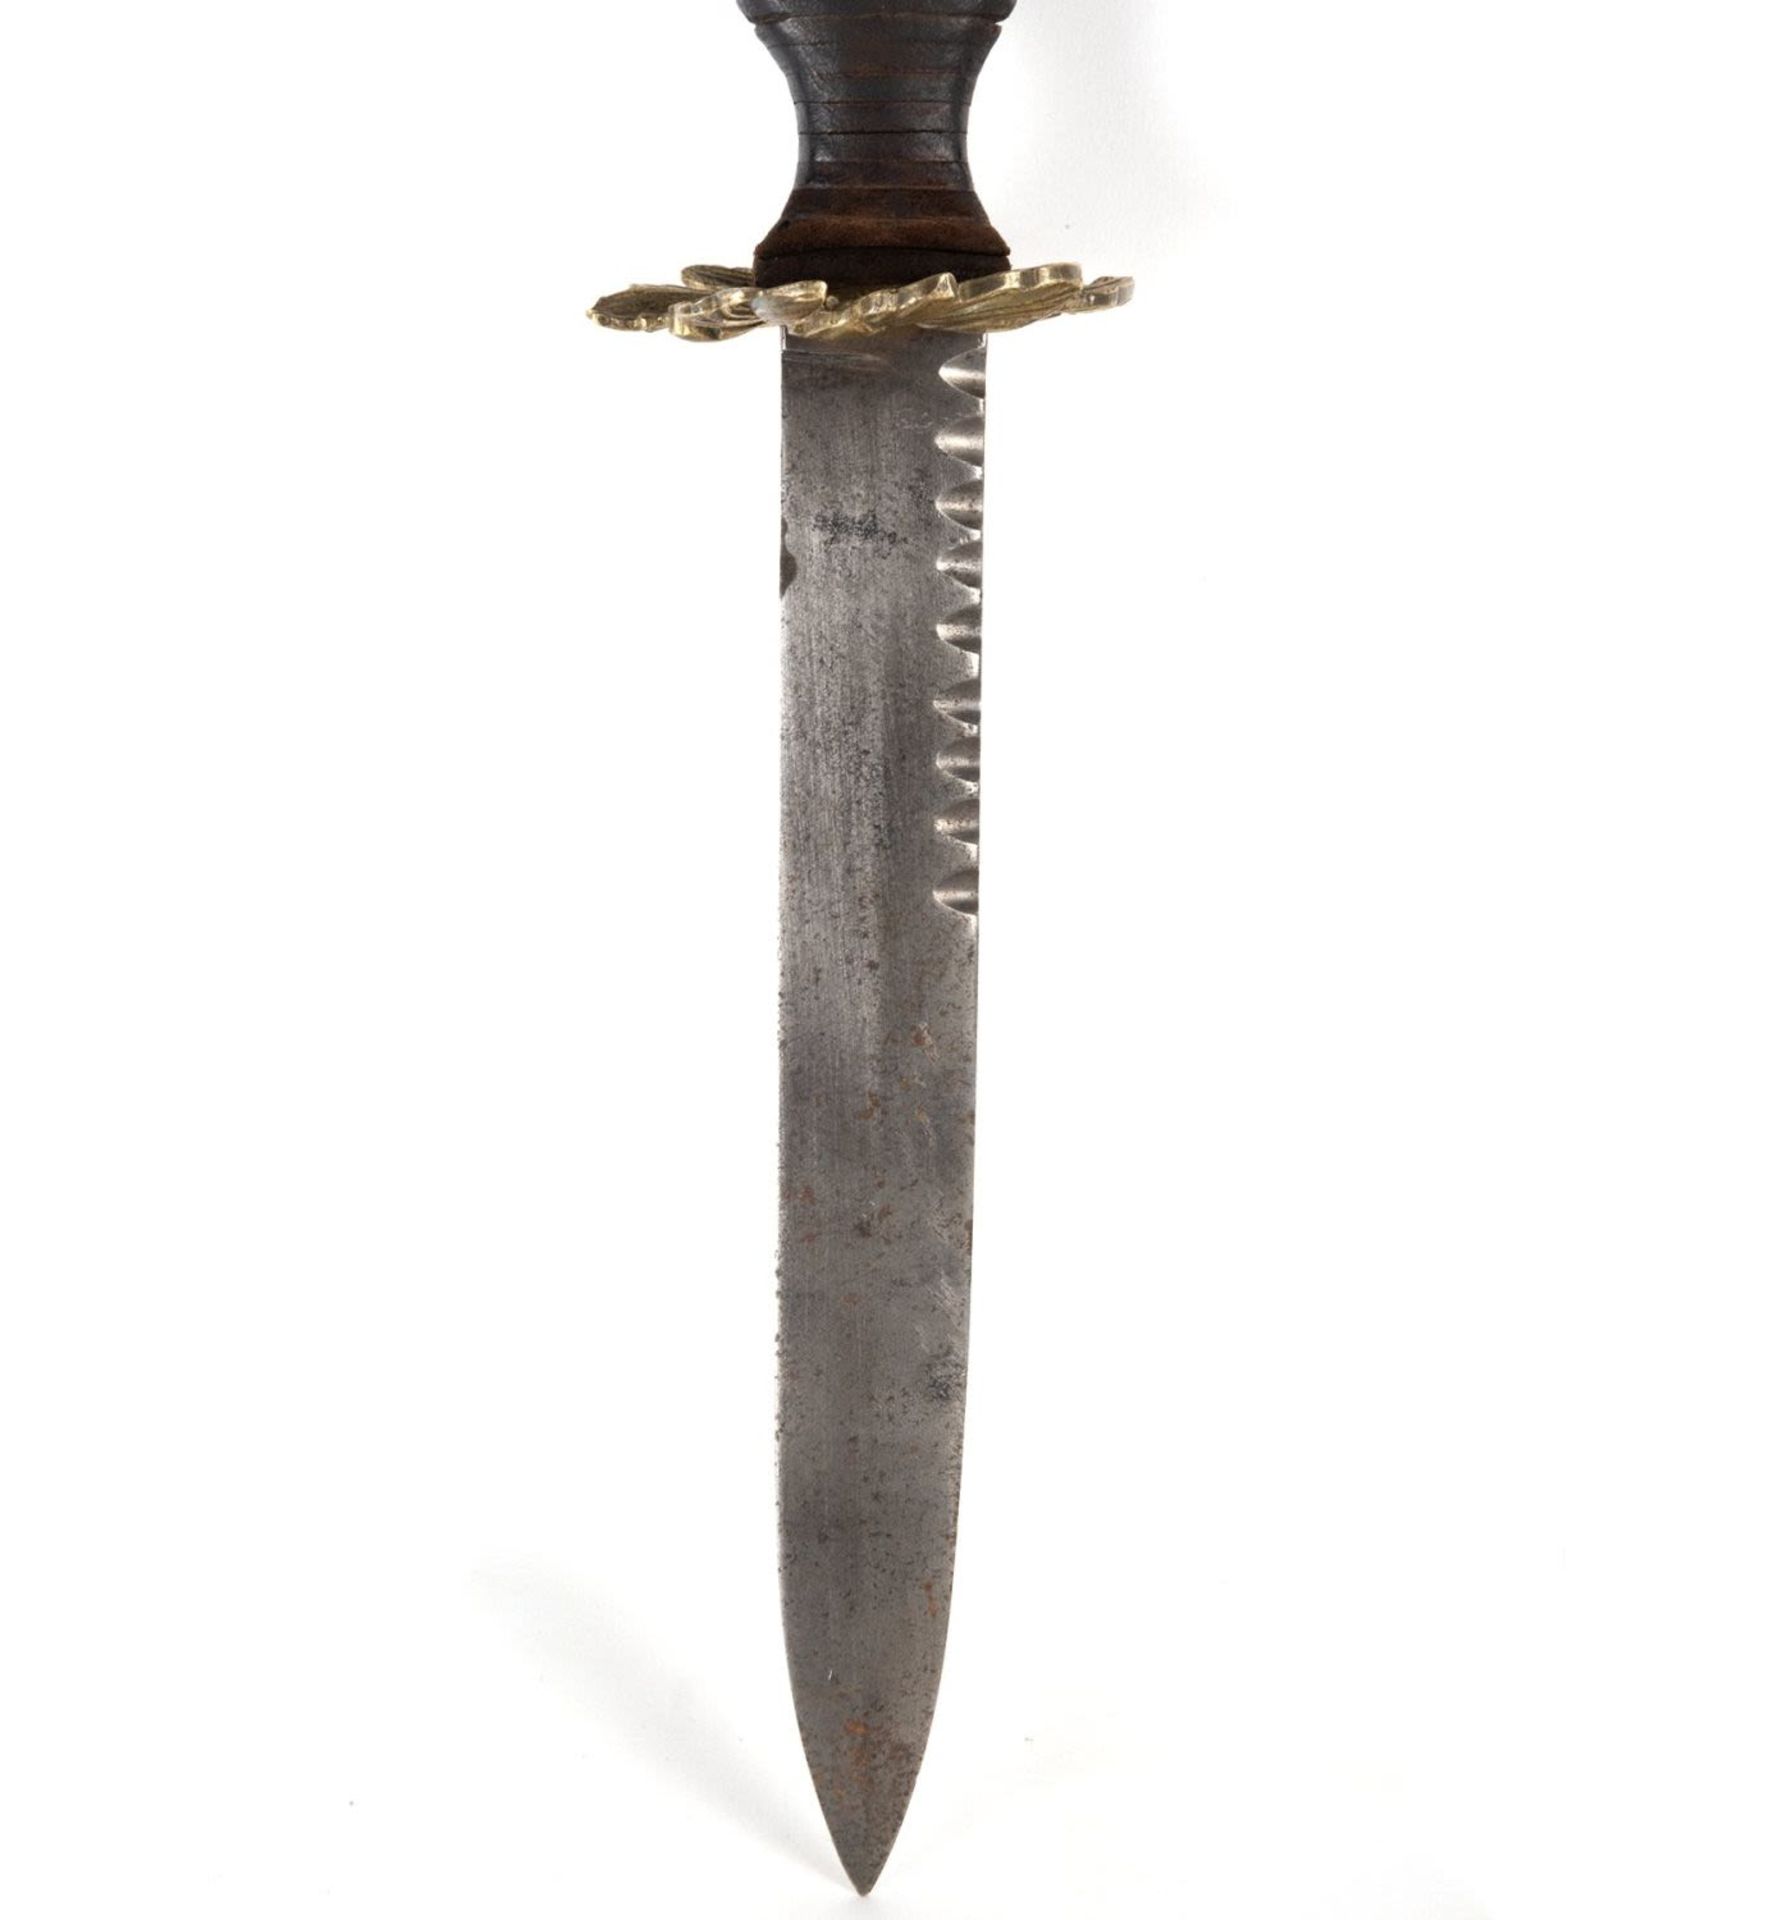 Oriental dagger with handle in Bronze and Wood, 18th century - Image 4 of 4